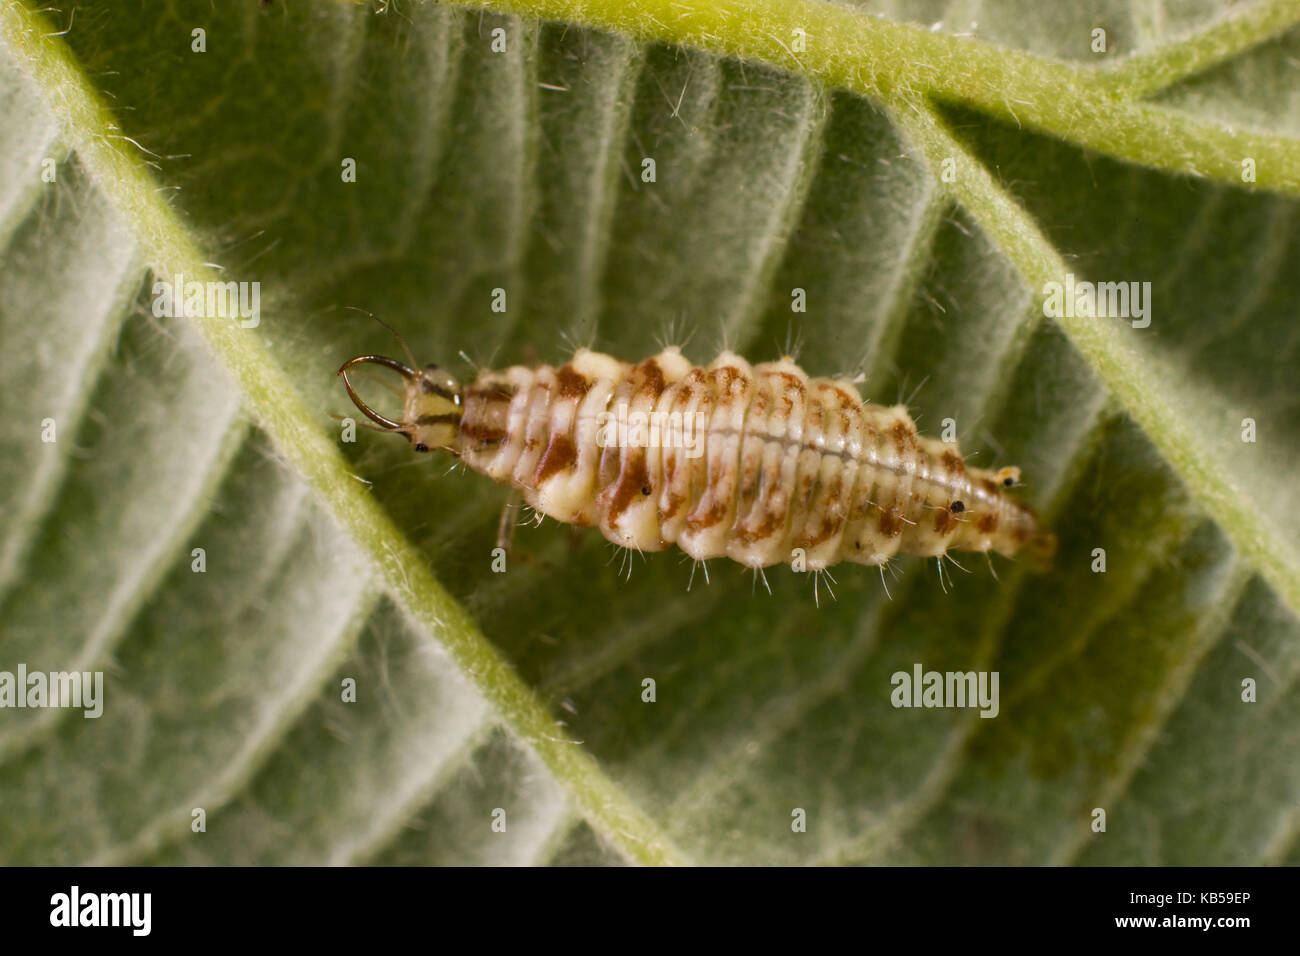 Chrysopidae, neuropterans, Green lacewing larva, Most species of lacewings and their larvae are active predators, and are often used for bio. control Stock Photo